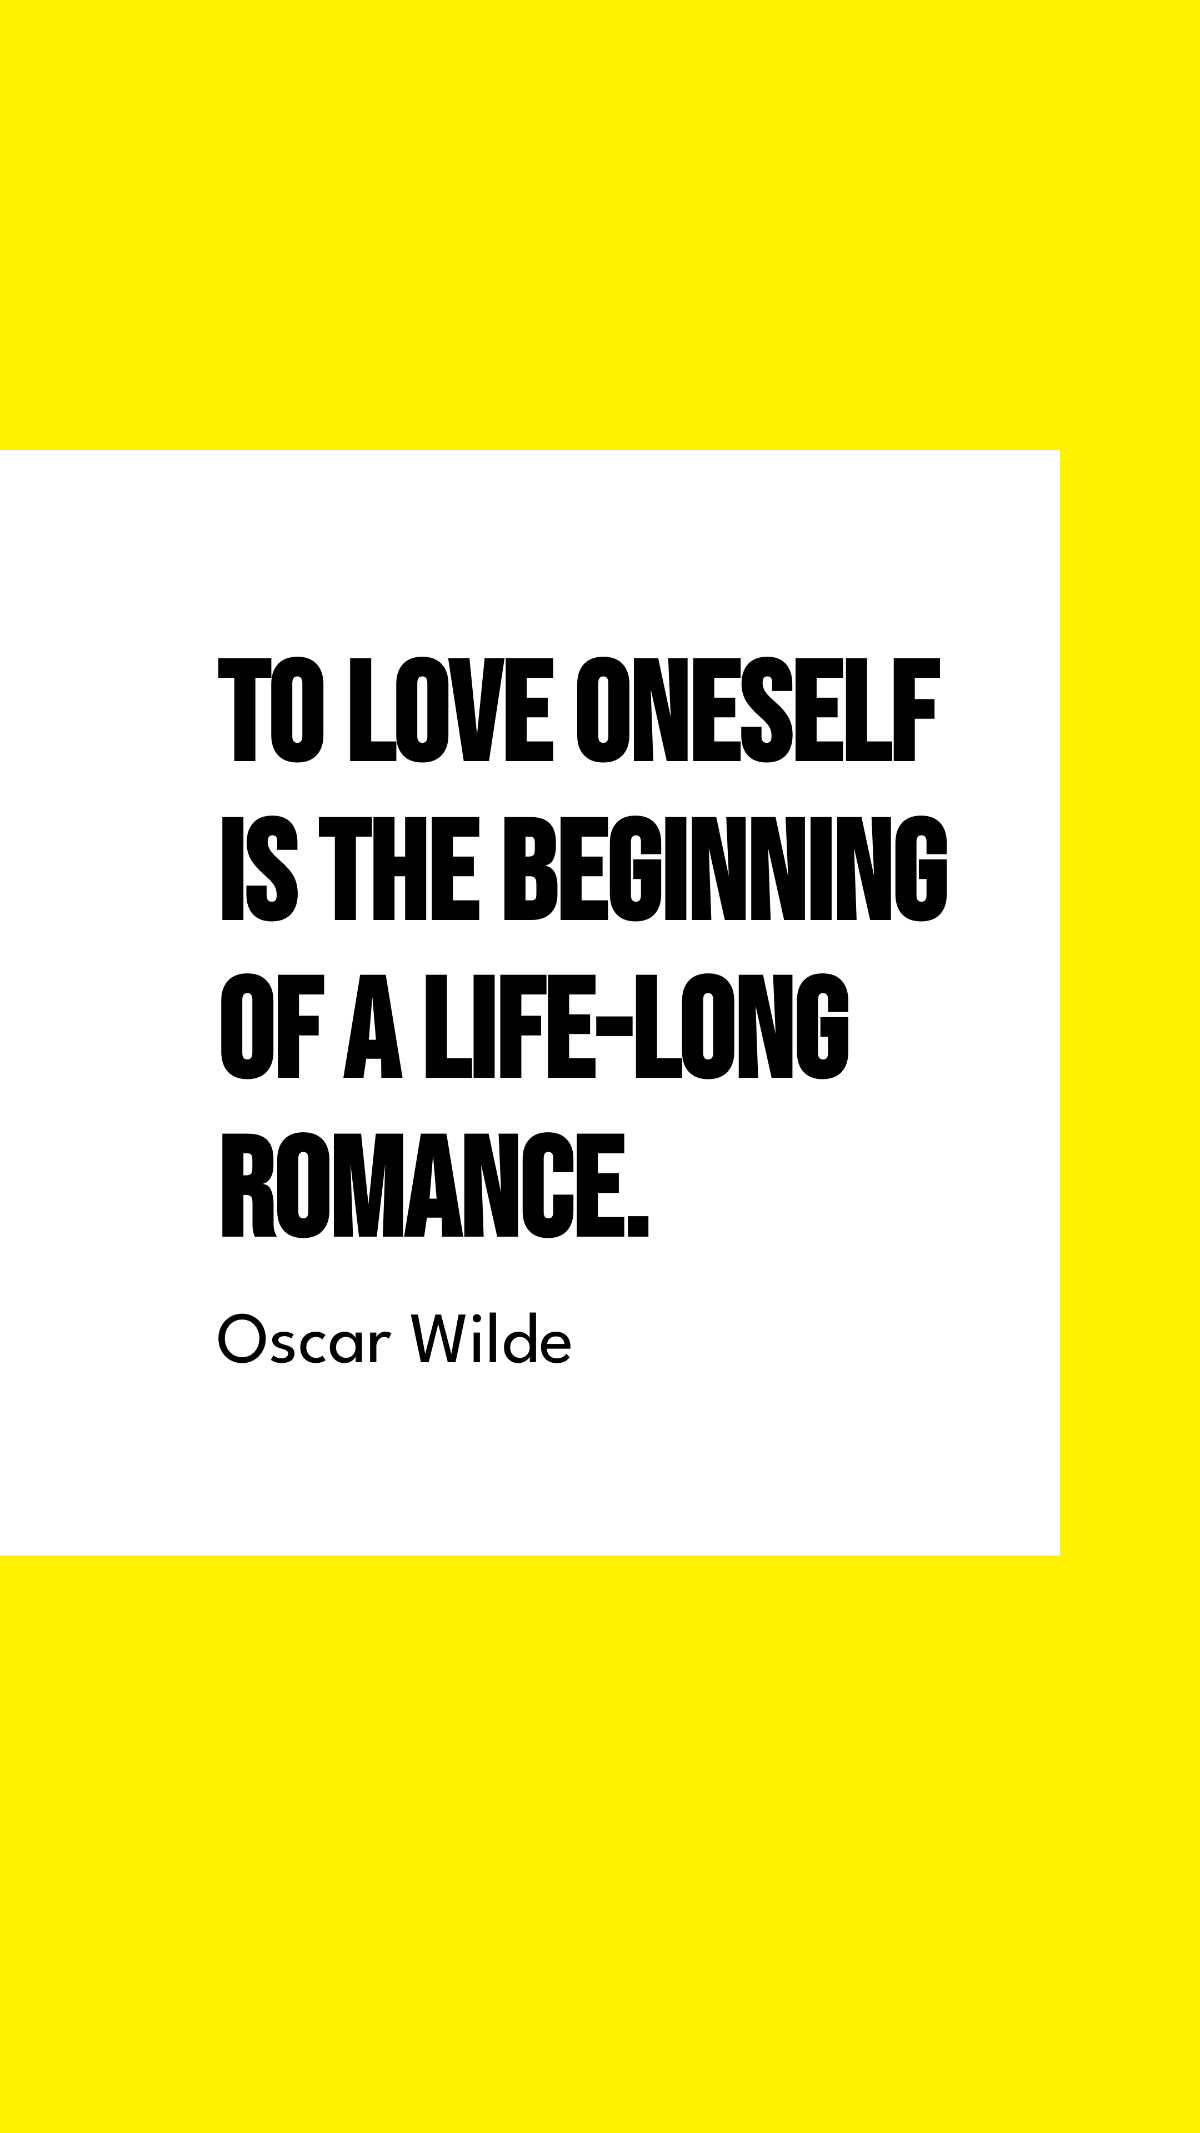 Oscar Wilde - To love oneself is the beginning of a life-long romance ...